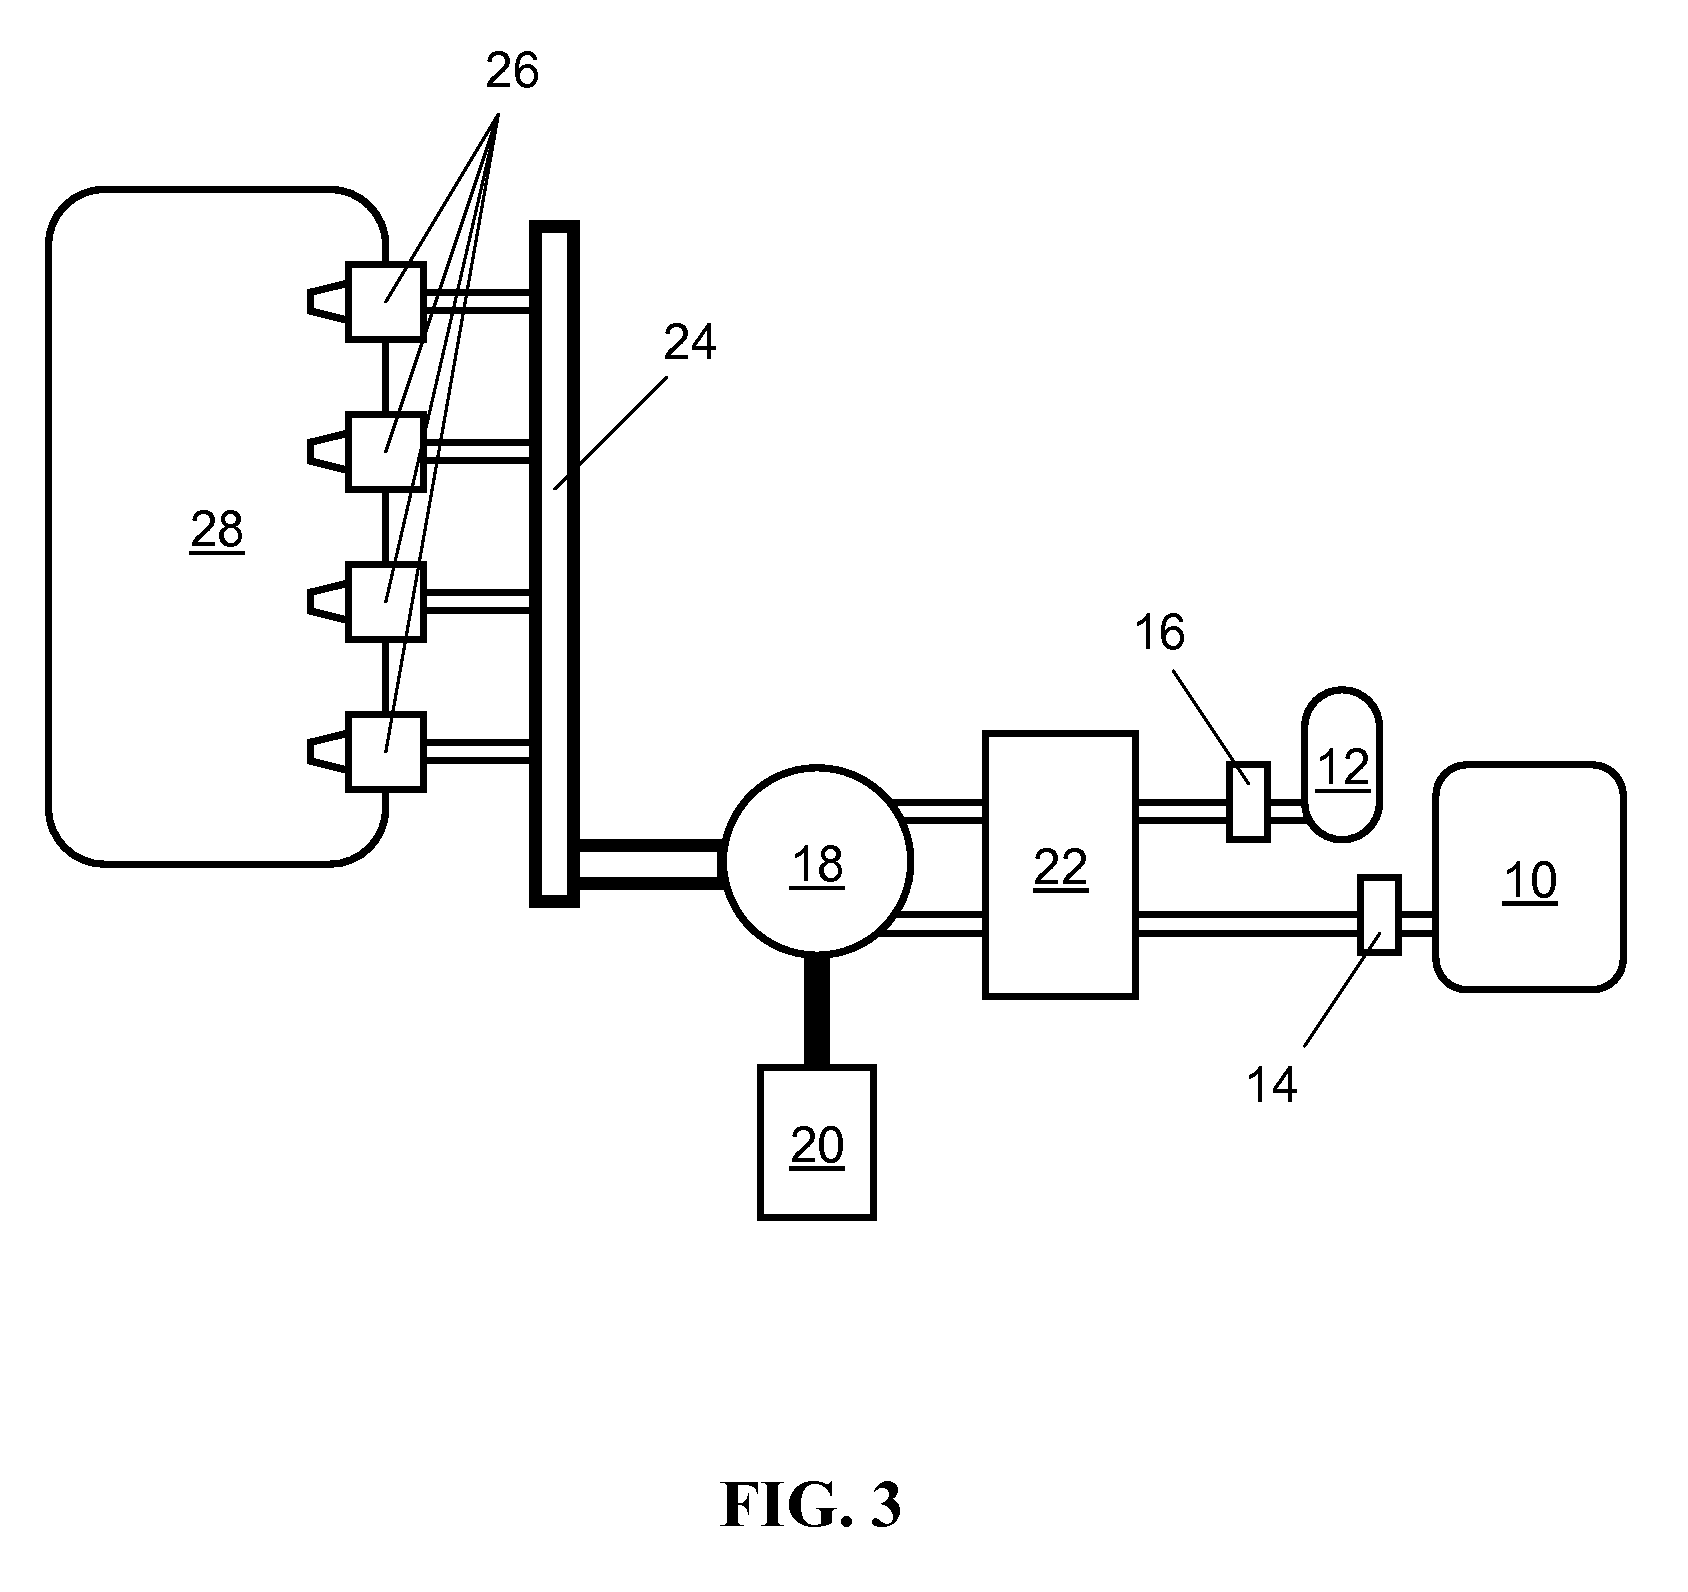 Single nozzle direct injection system for rapidly variable gasoline/Anti-knock agent mixtures